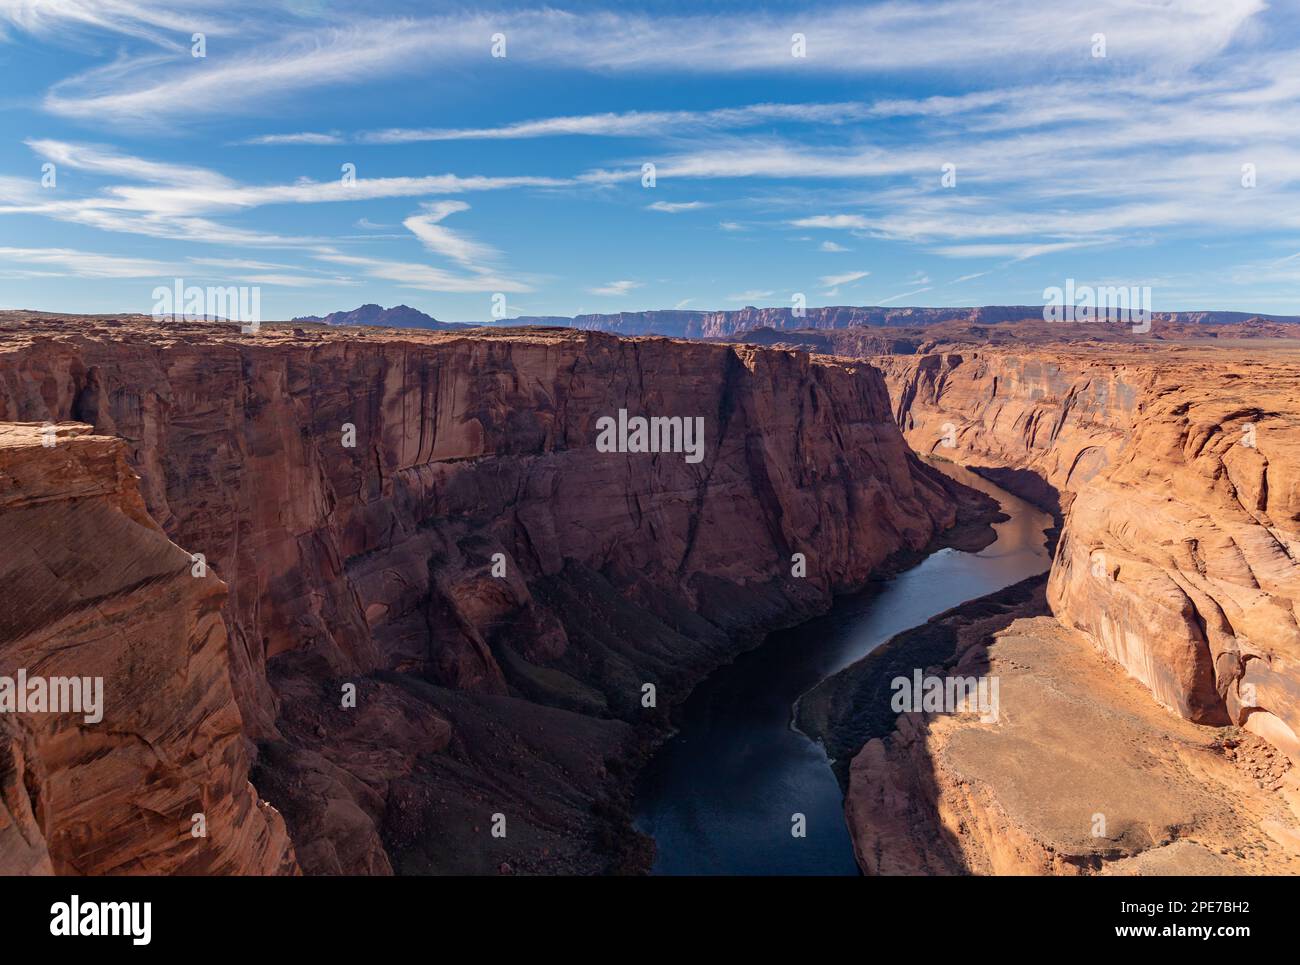 A picture of the Colorado River and the Grand Canyon landscape around next to the Horseshoe Bend. Stock Photo